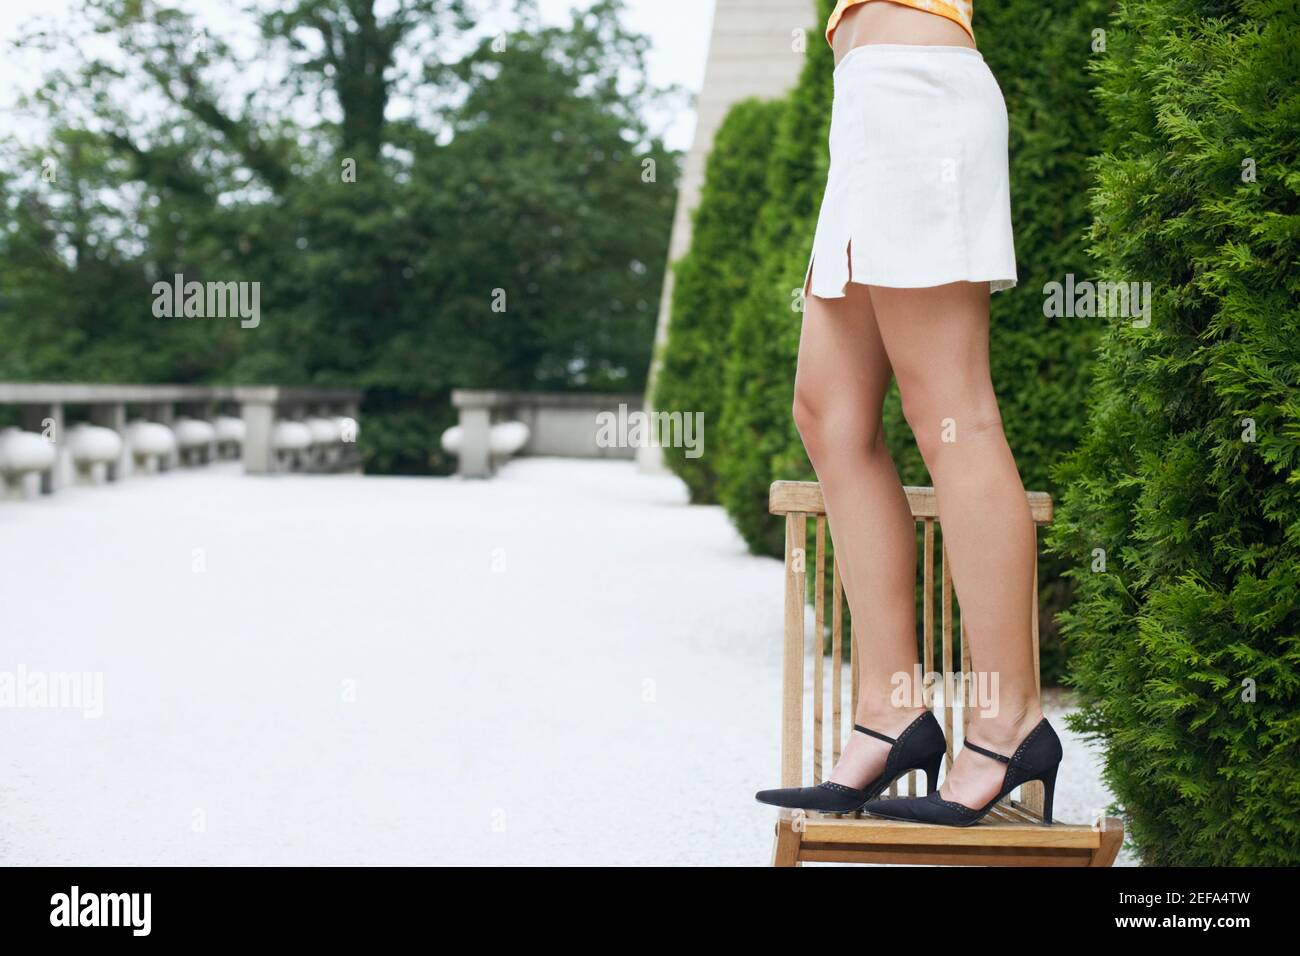 Low section view of a young woman standing on a chair Stock Photo